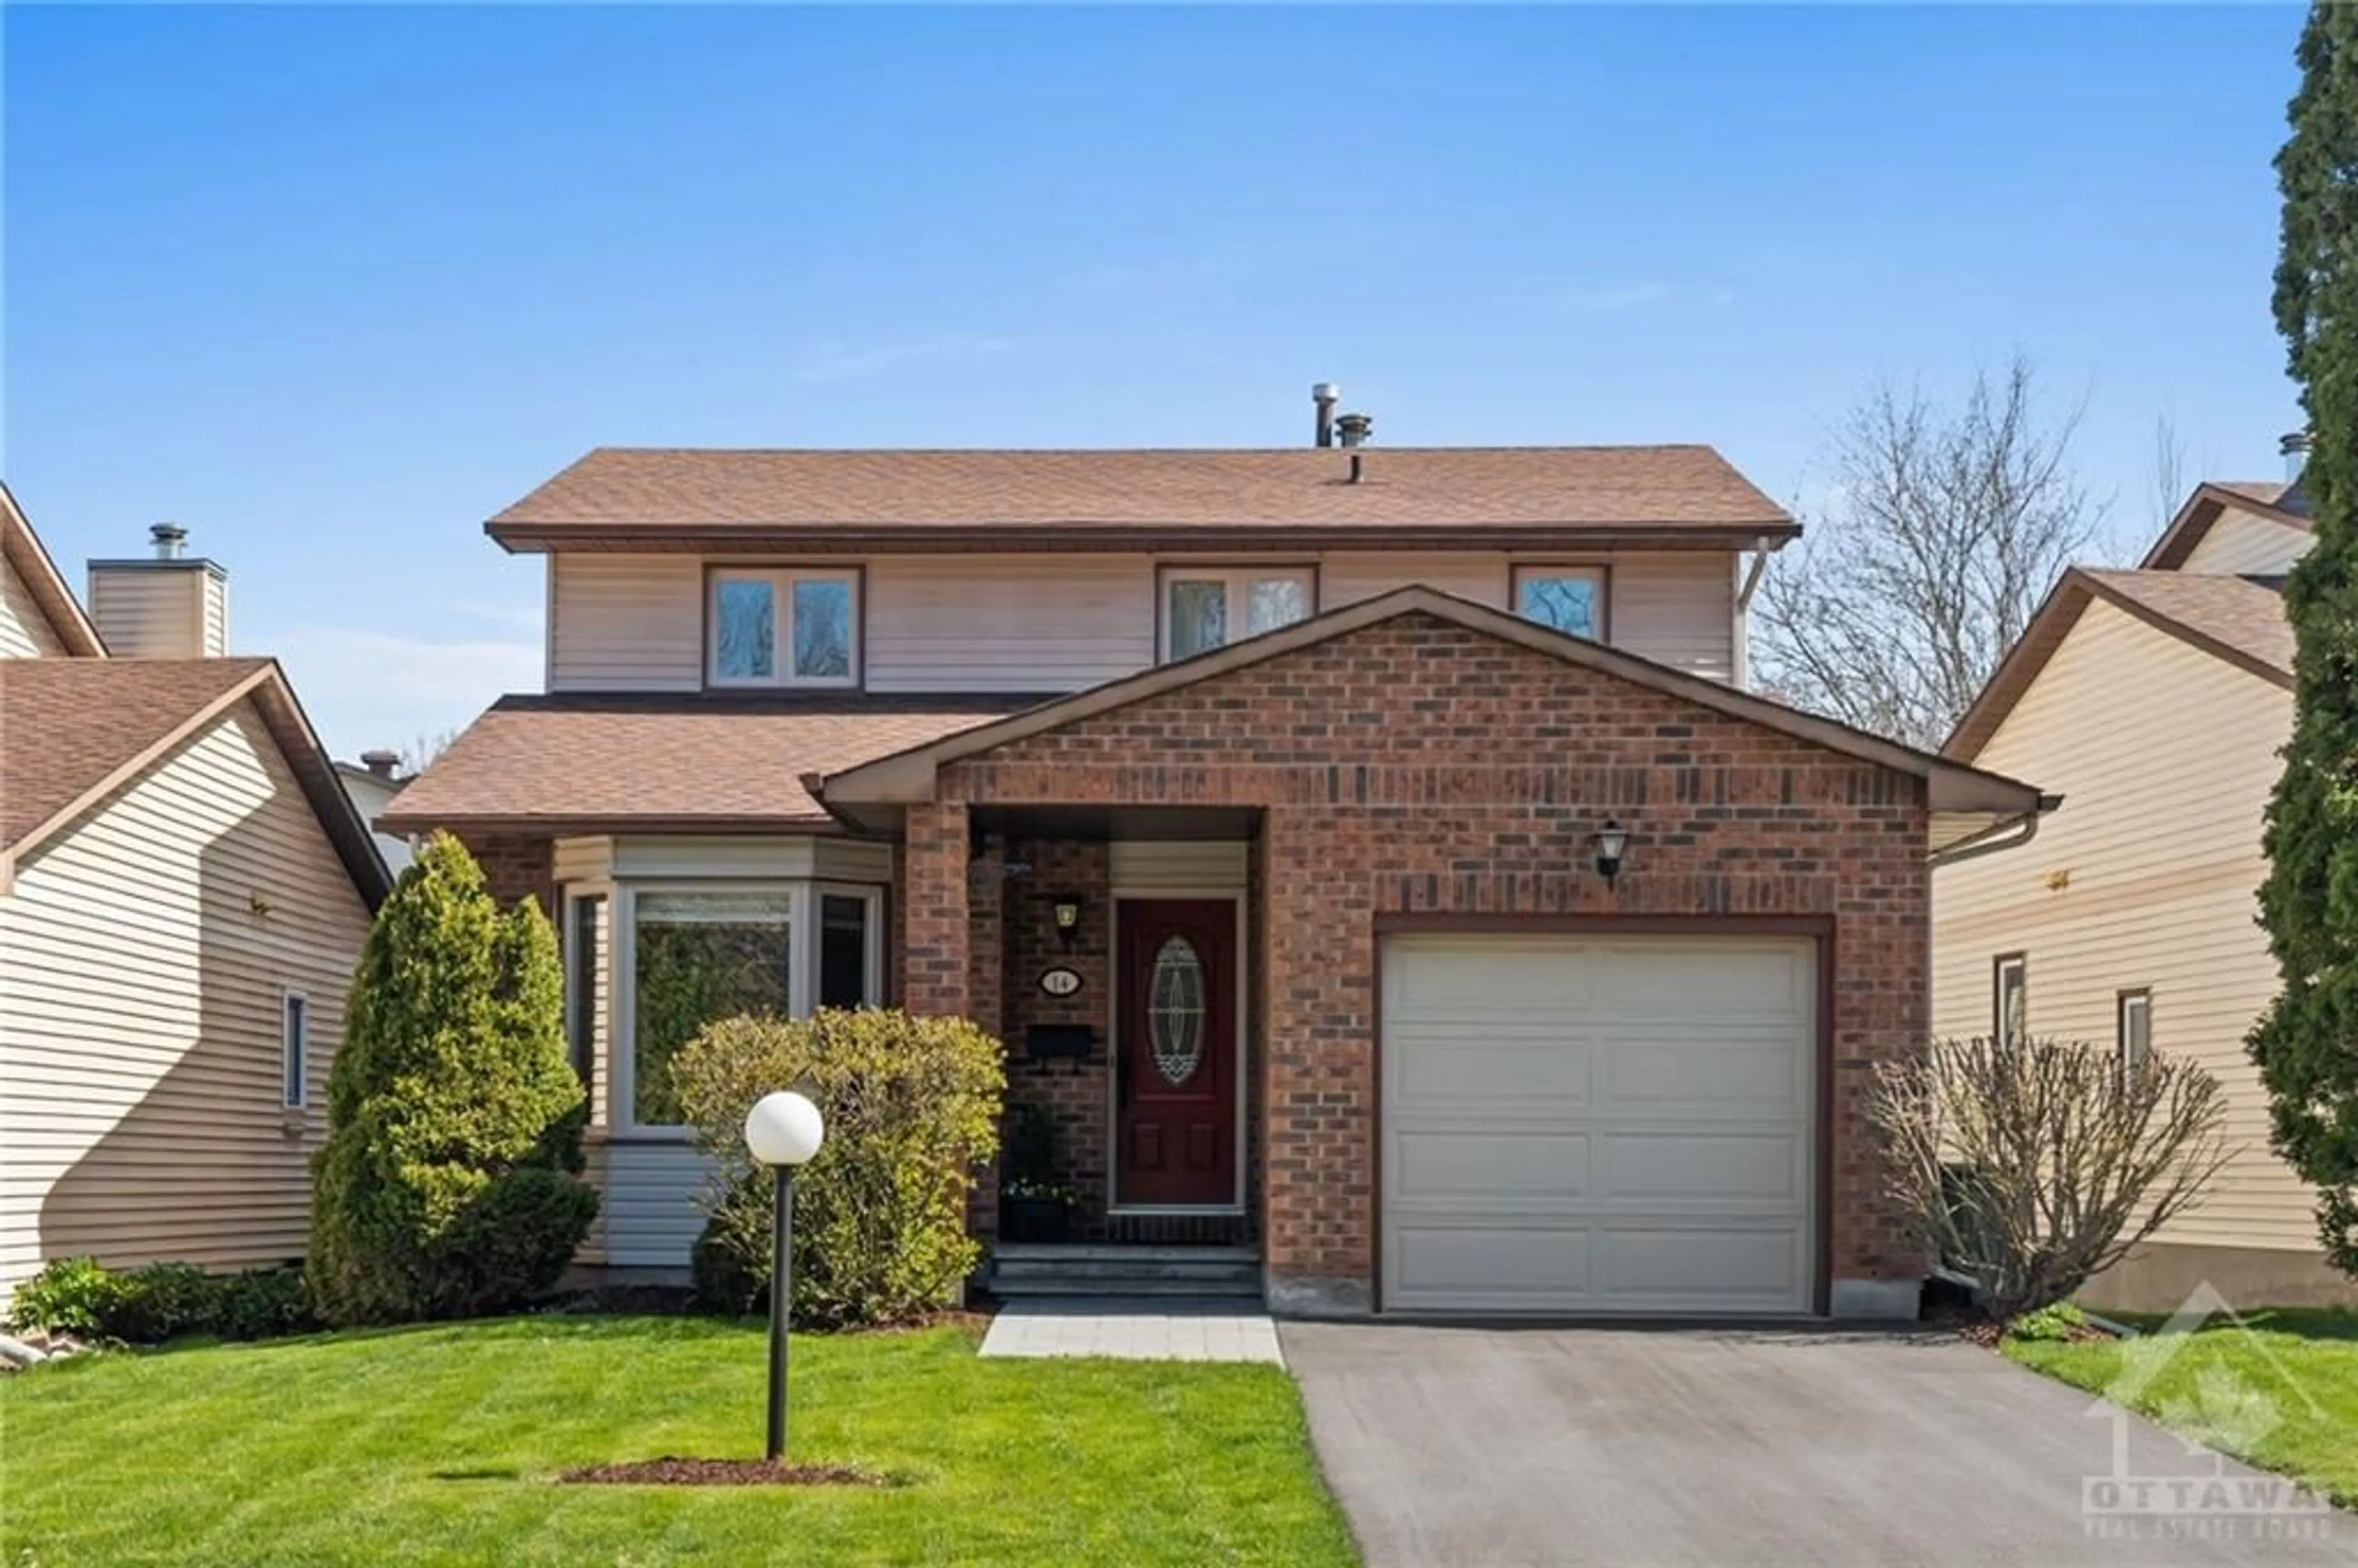 Home with brick exterior material for 14 SEWELL Way, Ottawa Ontario K2L 2W5